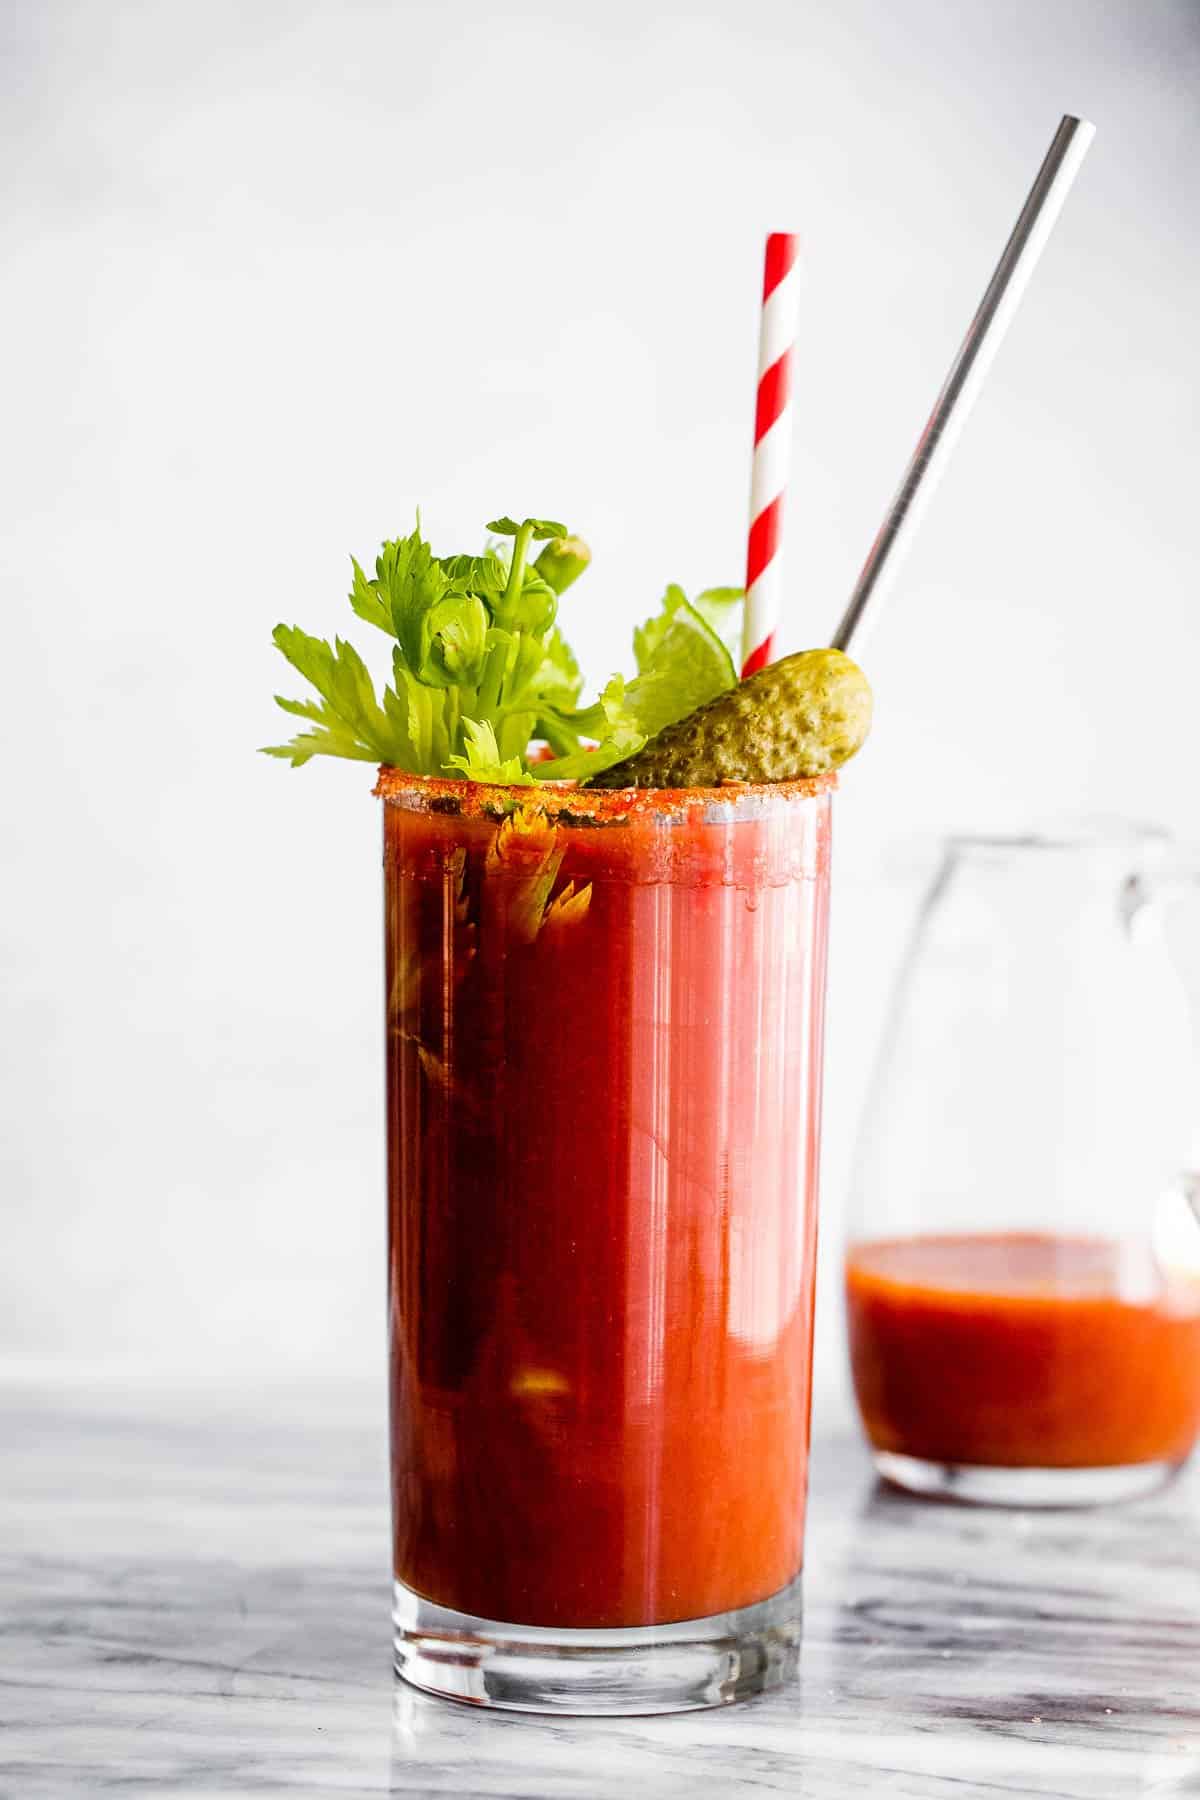 Bloody Mary cocktail garnished with straws, pickles and celery sticks